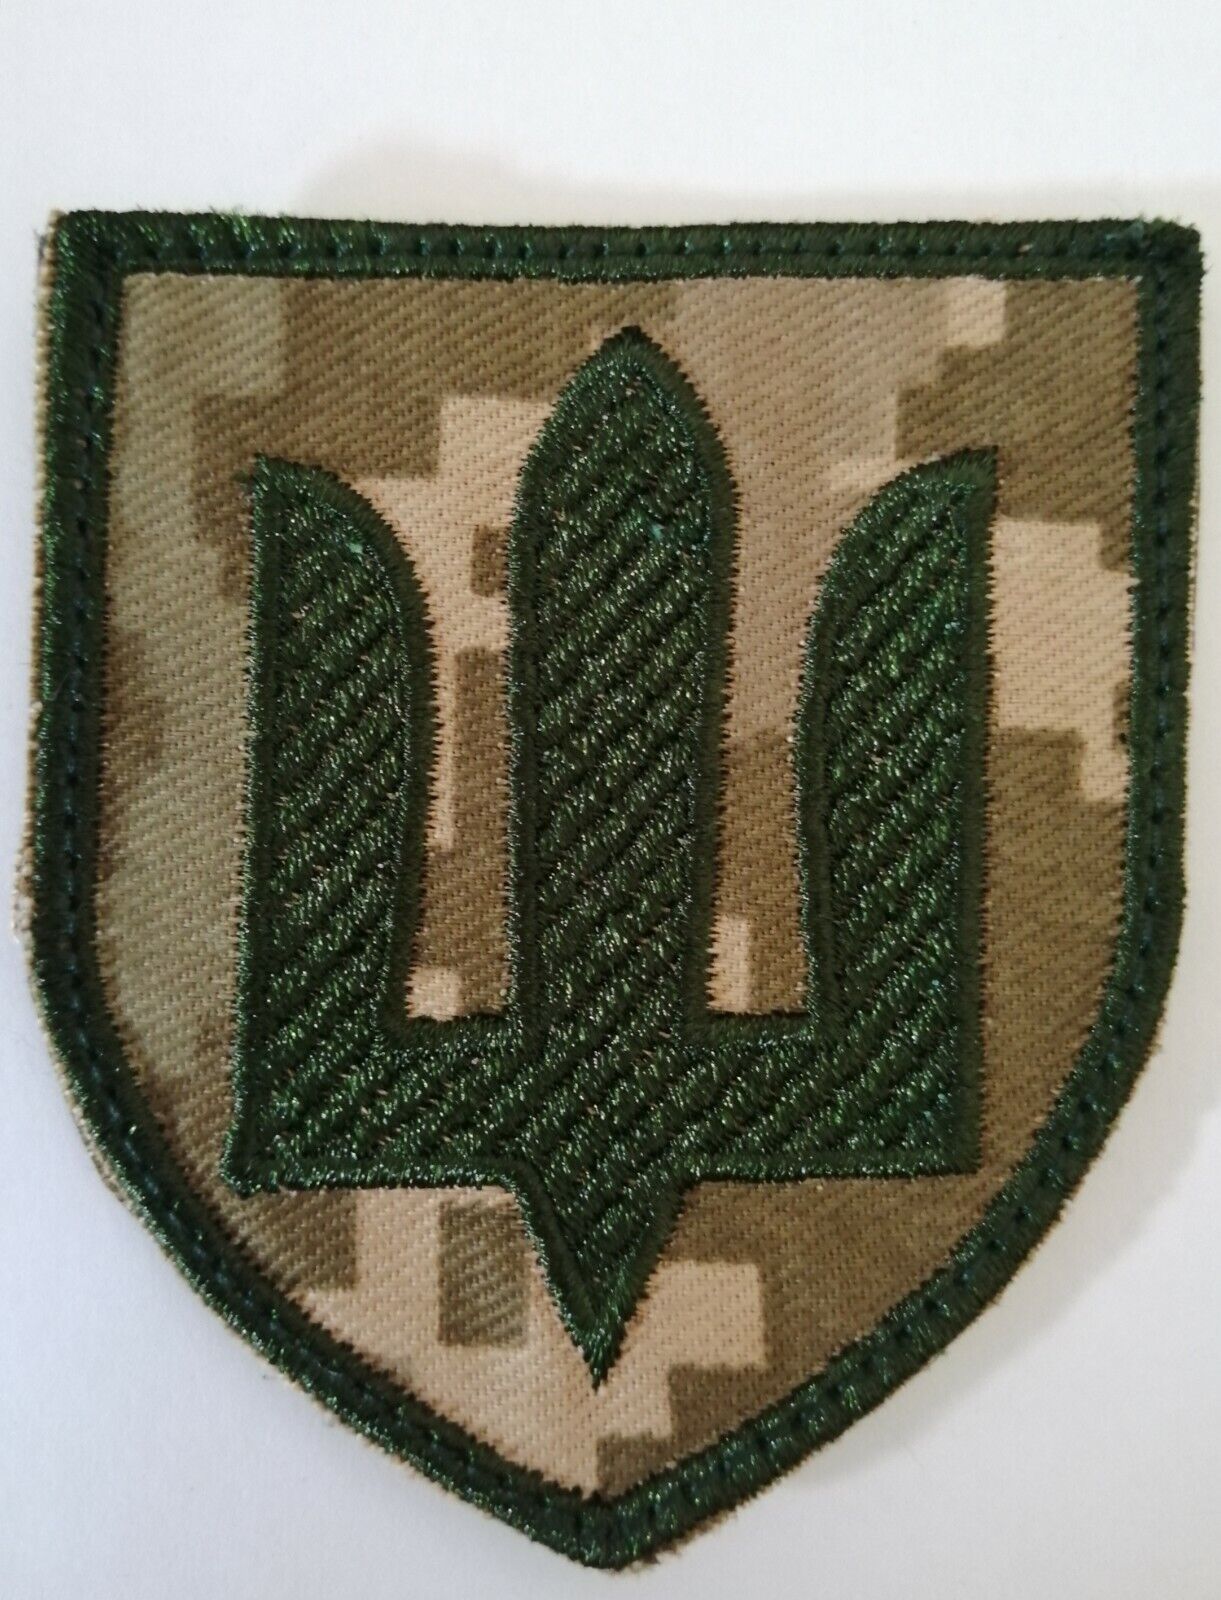 Ukraine: embroidered tactical patch of ukrainian armed forces infantry.